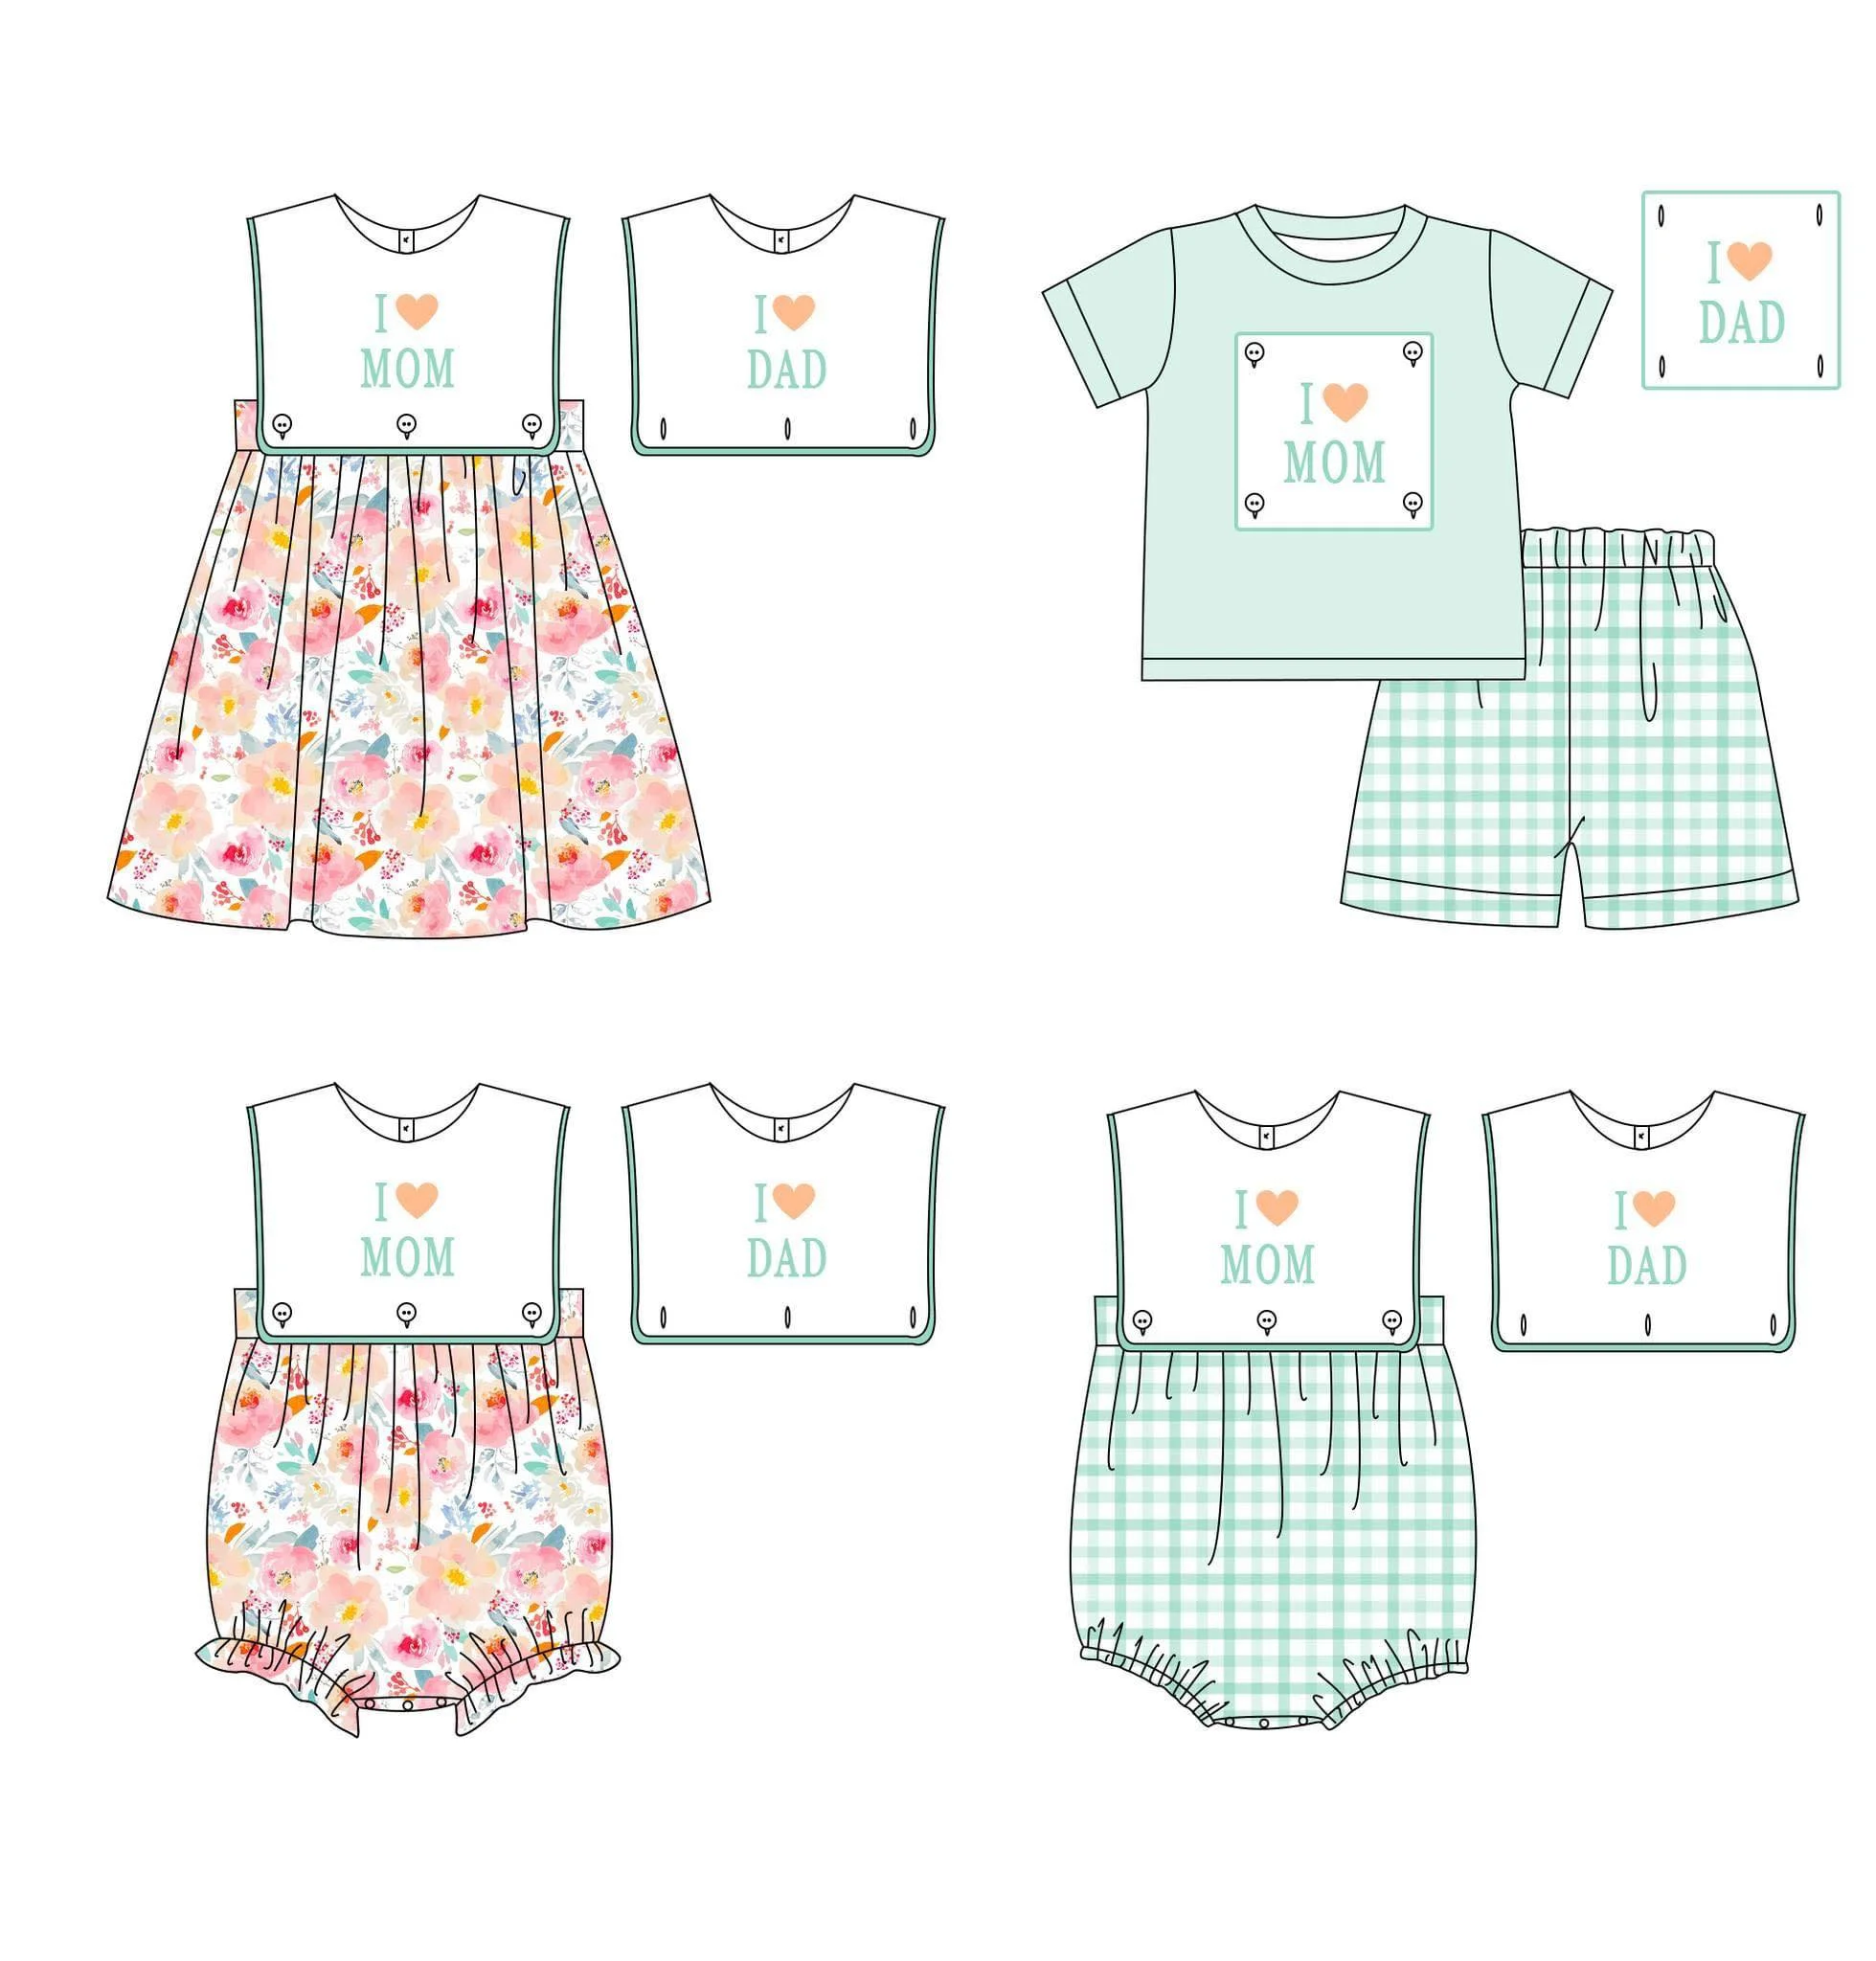 

Infant Dress Outfits Baby Girl Clothes Set 2pc Romper Suit I LOVE MOM DAD Embroidery Bodysuit Shirt Sleeve Mint Jumpsuit Pants